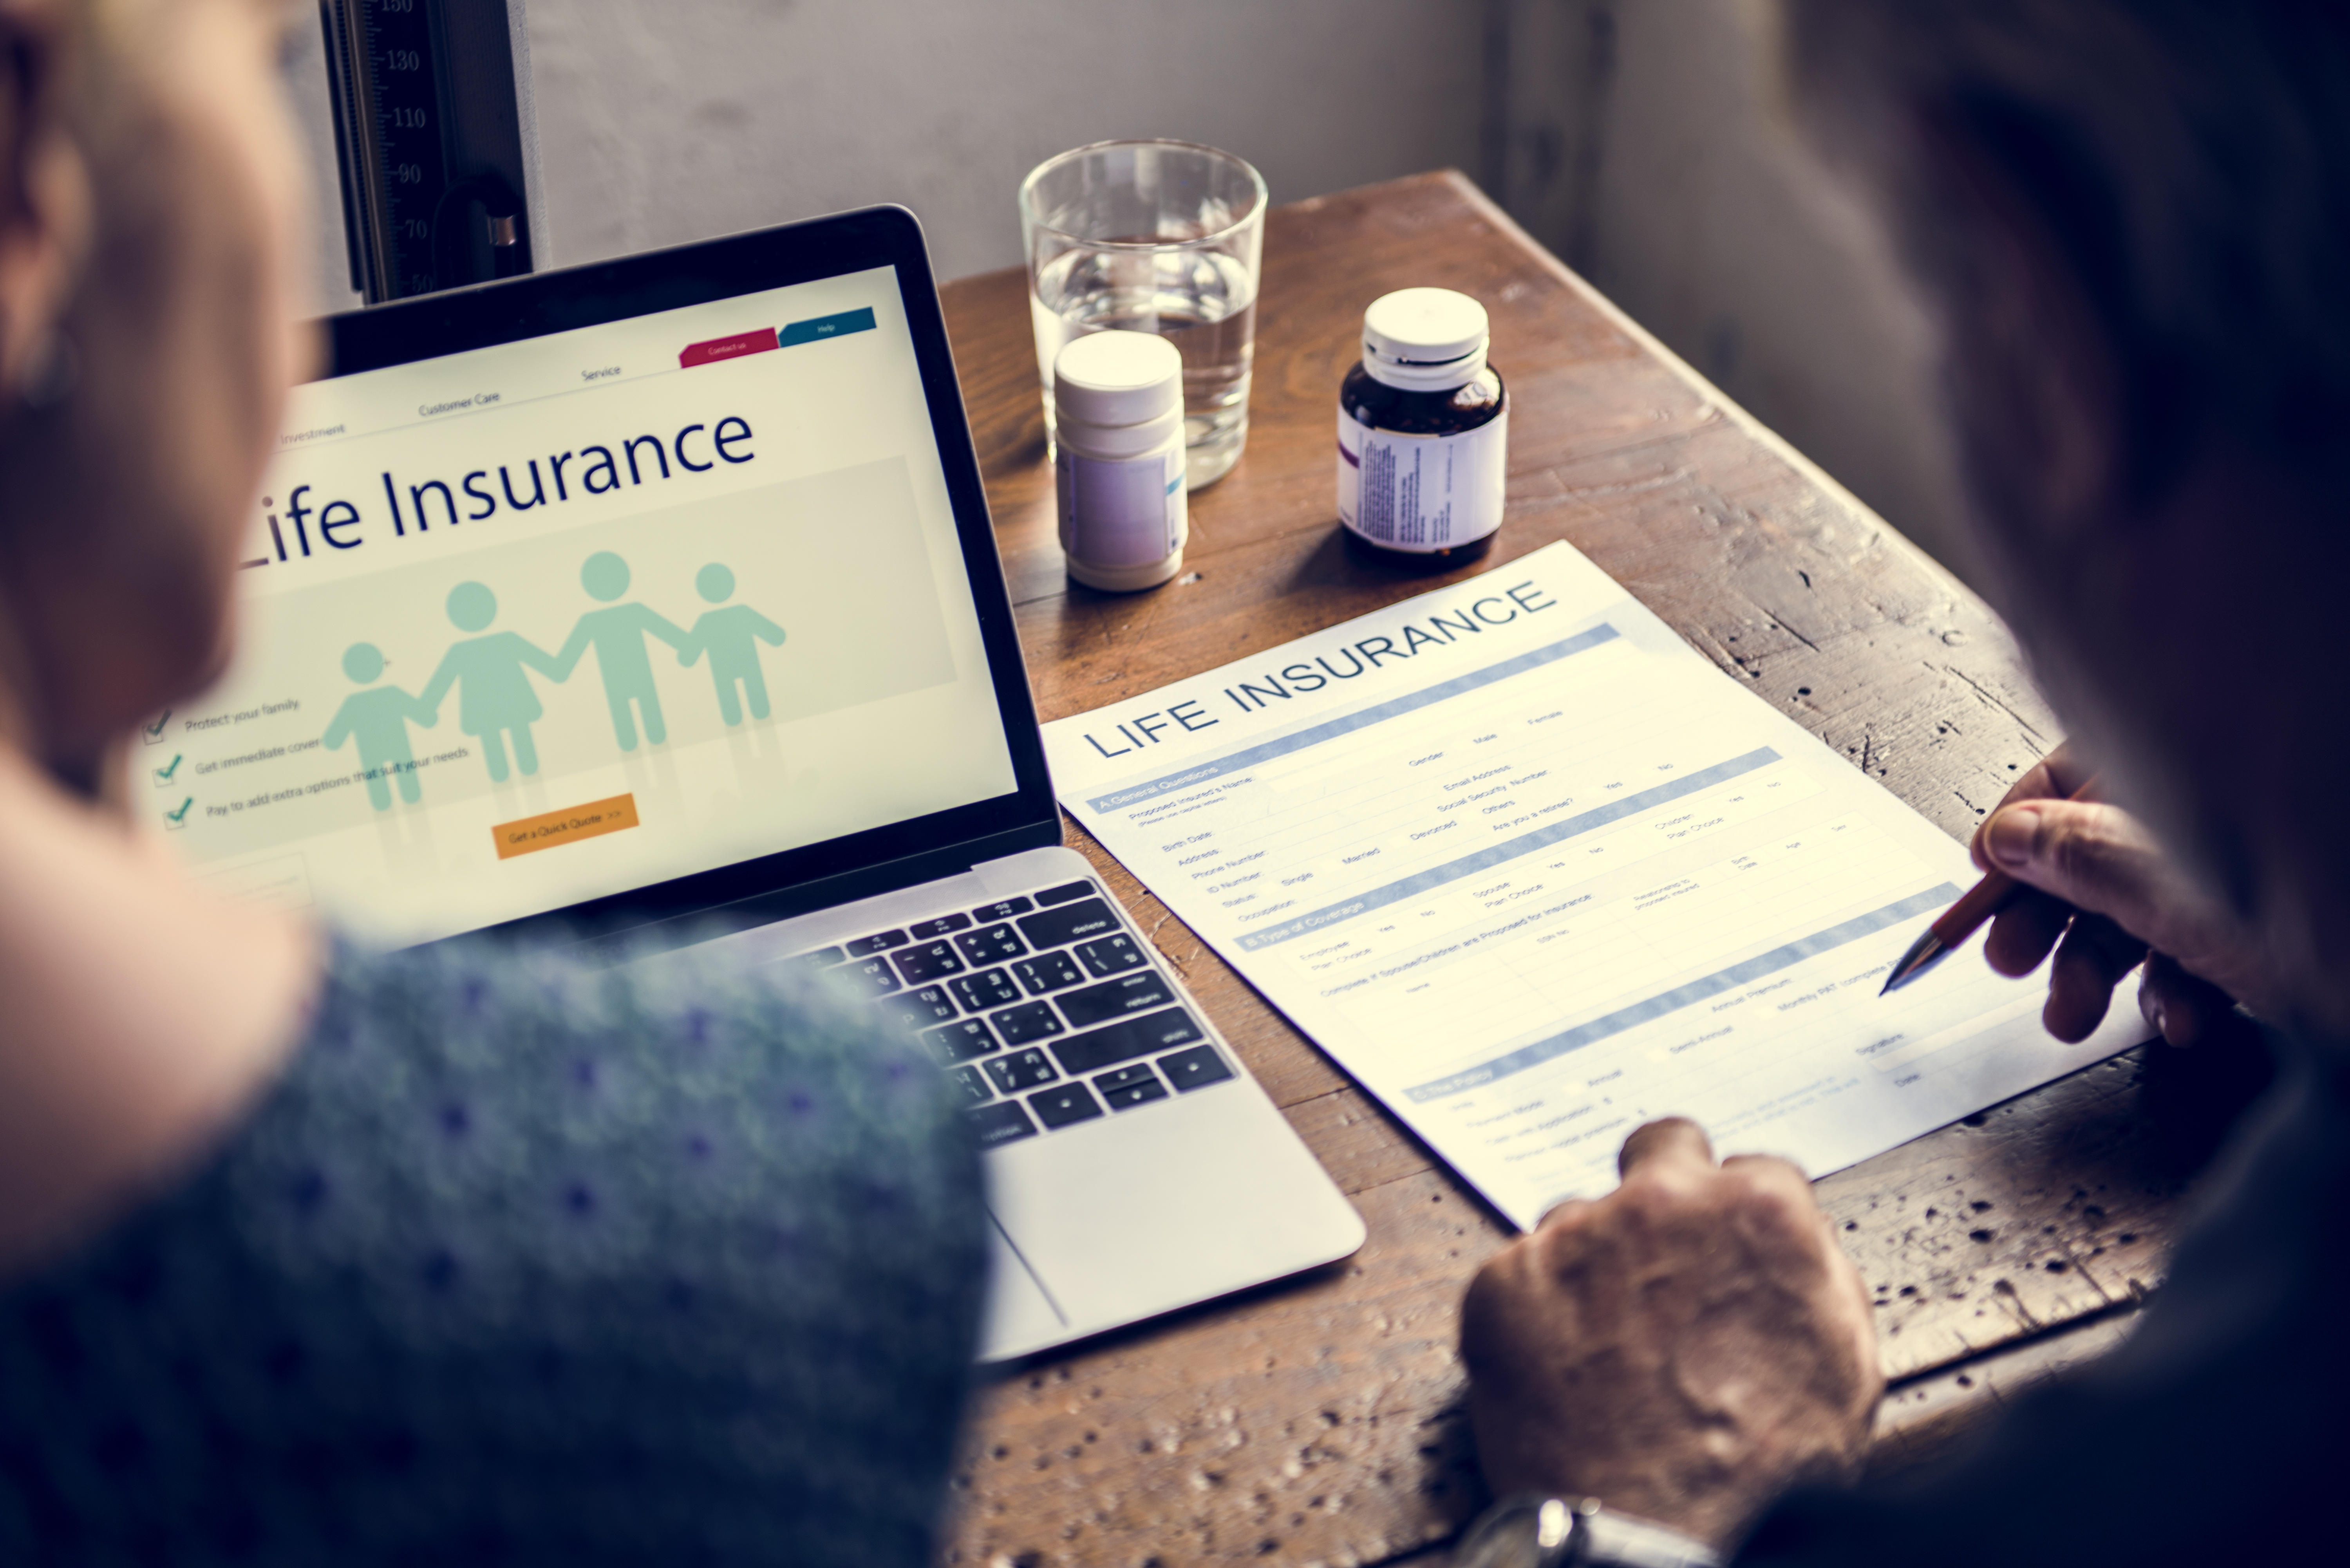 Who Will Benefit From Your Life Insurance Policy?